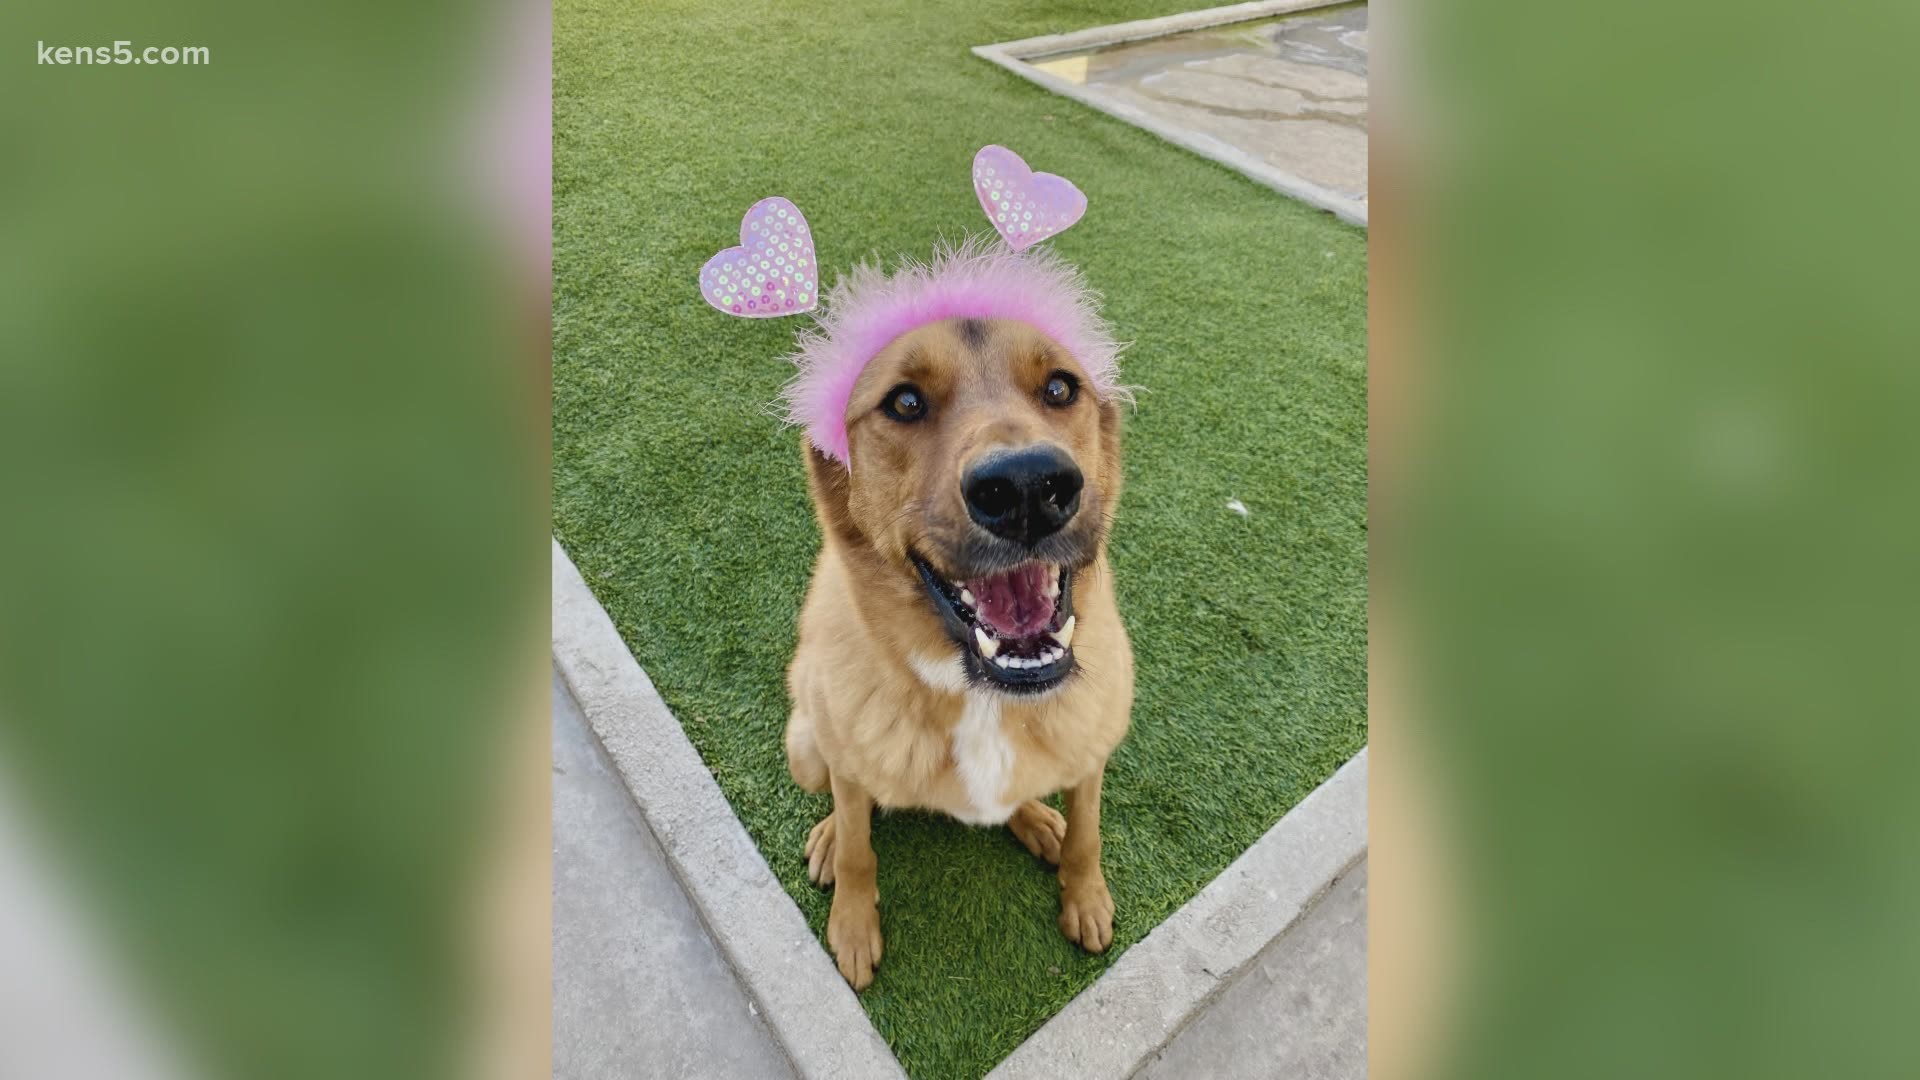 The San Antonio Humane Society introduces you to a sweet dog looking for her fur-ever home! More at the KENS 5 Puppy Playground.